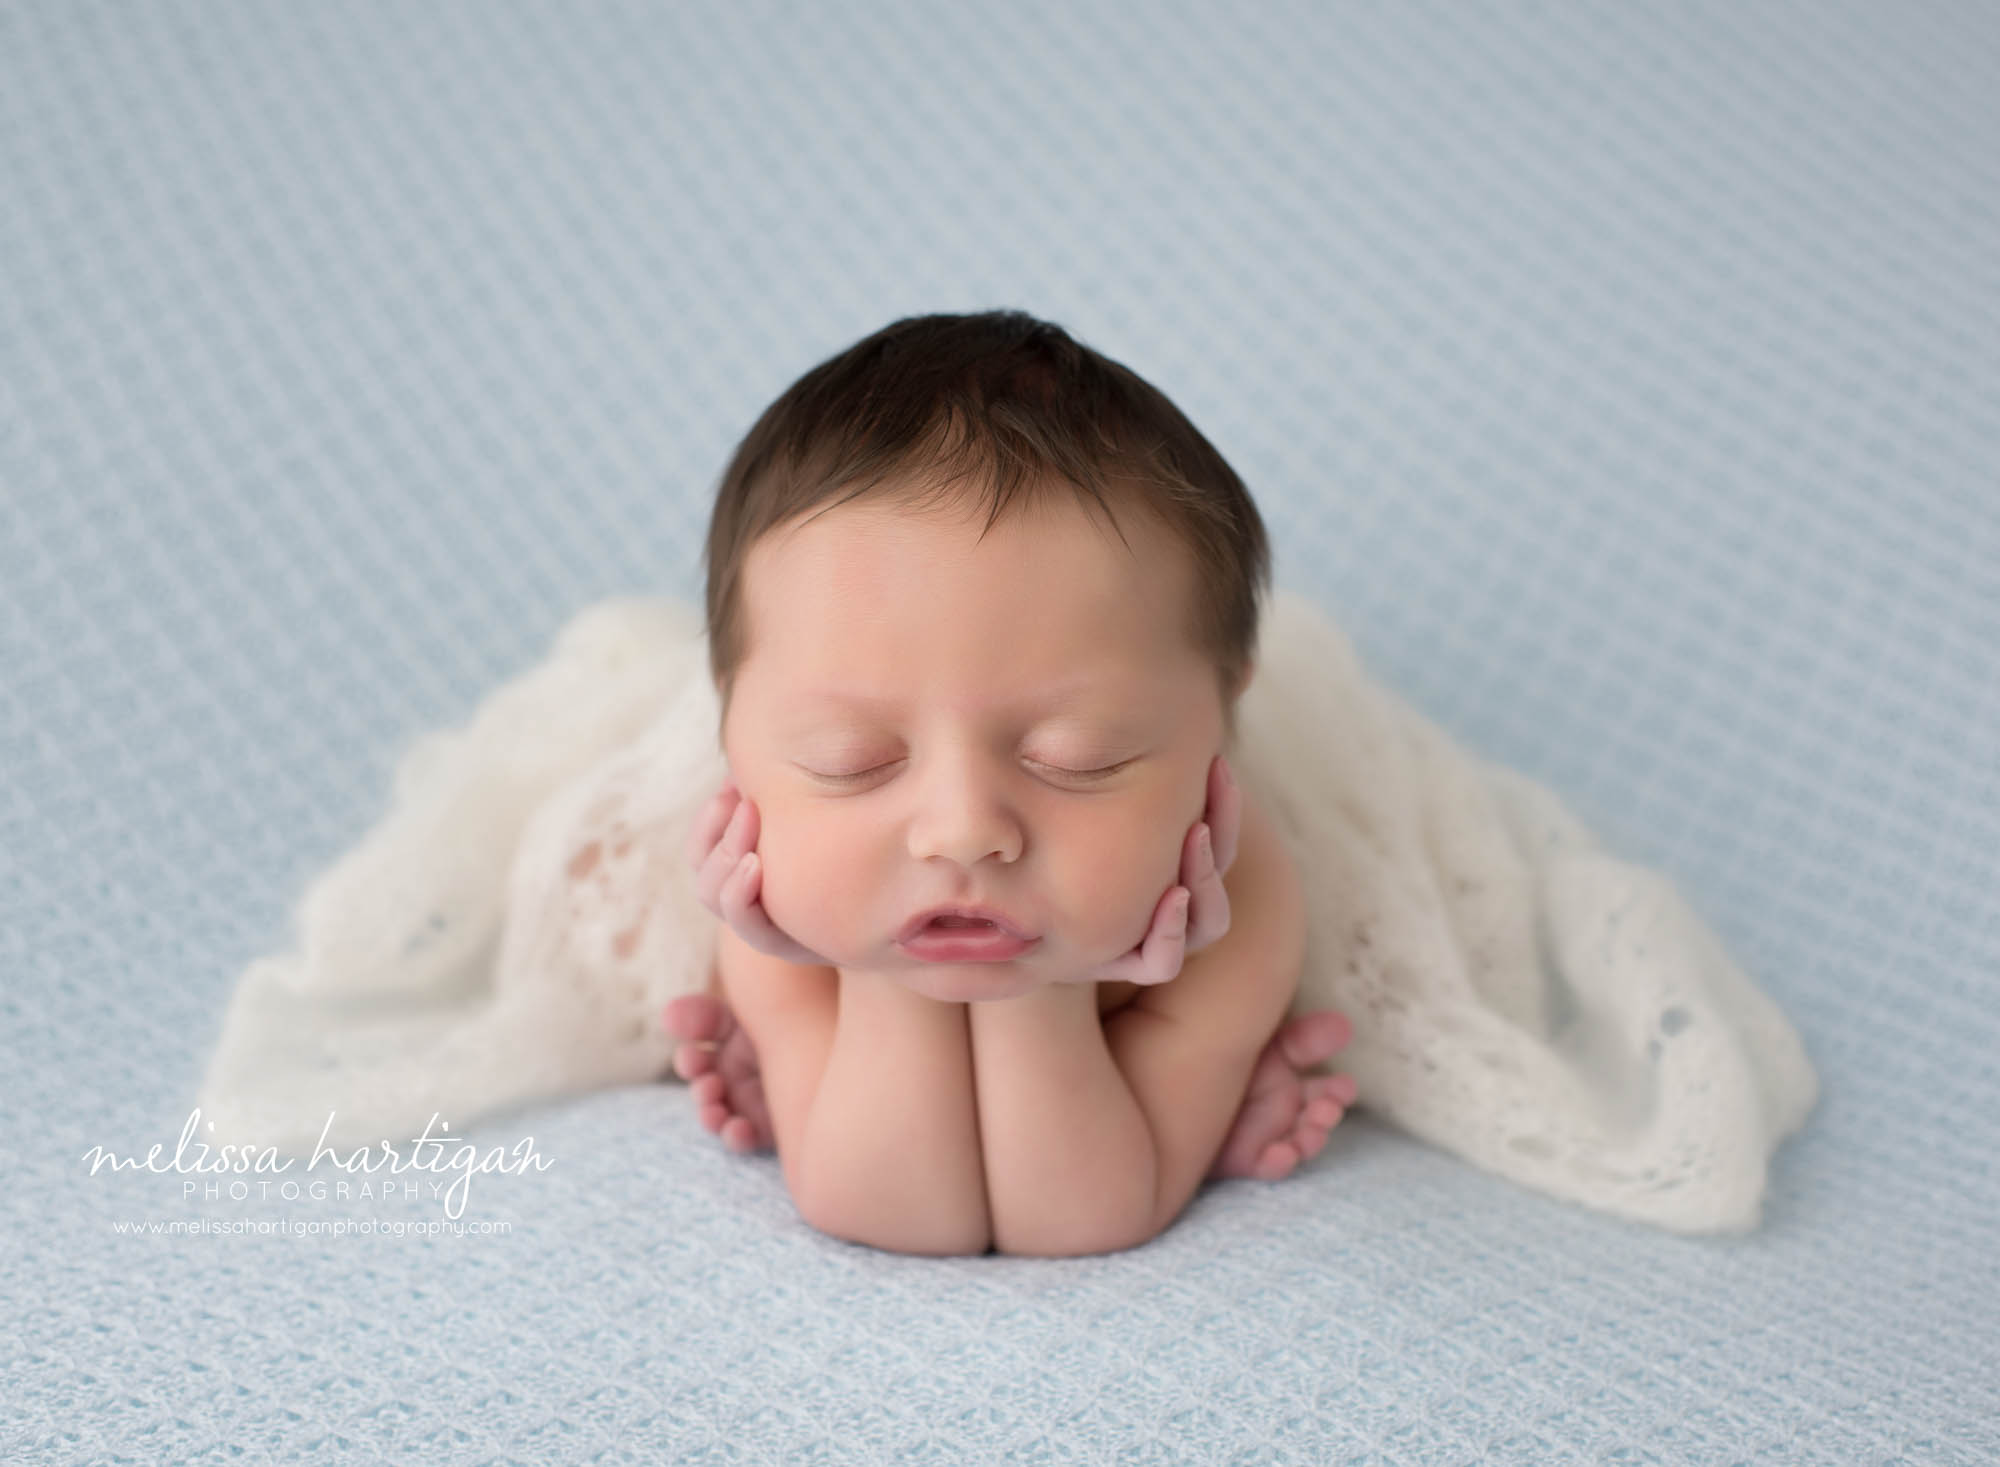 Leila CT Newborn Session baby girl sleeping in froggy pose on blue blanket